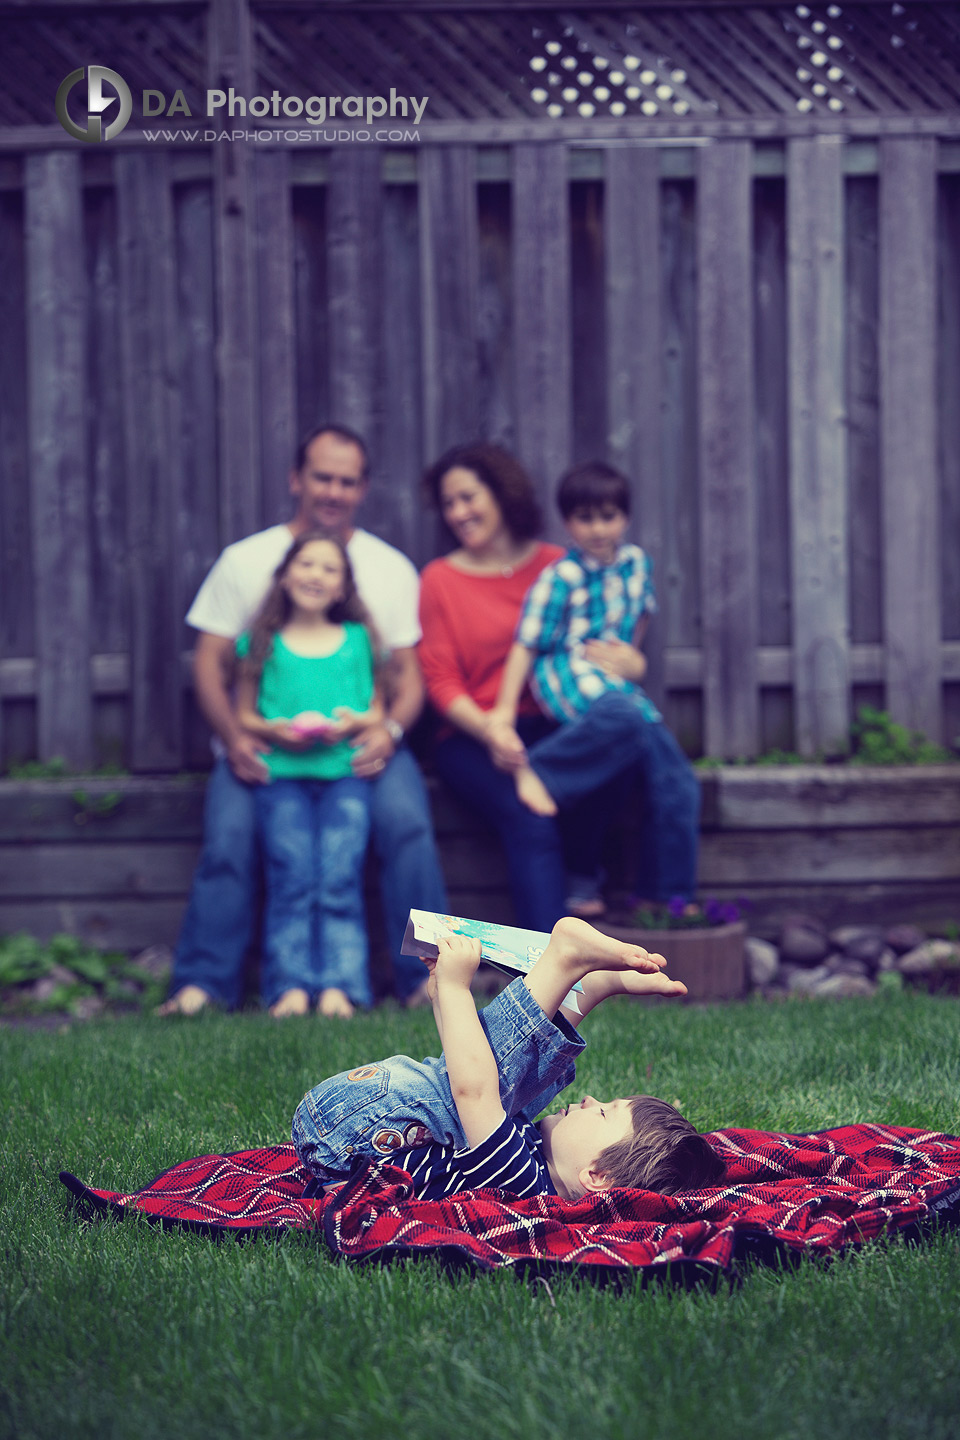 "Reading" A Book - Family Lifestyle Photography